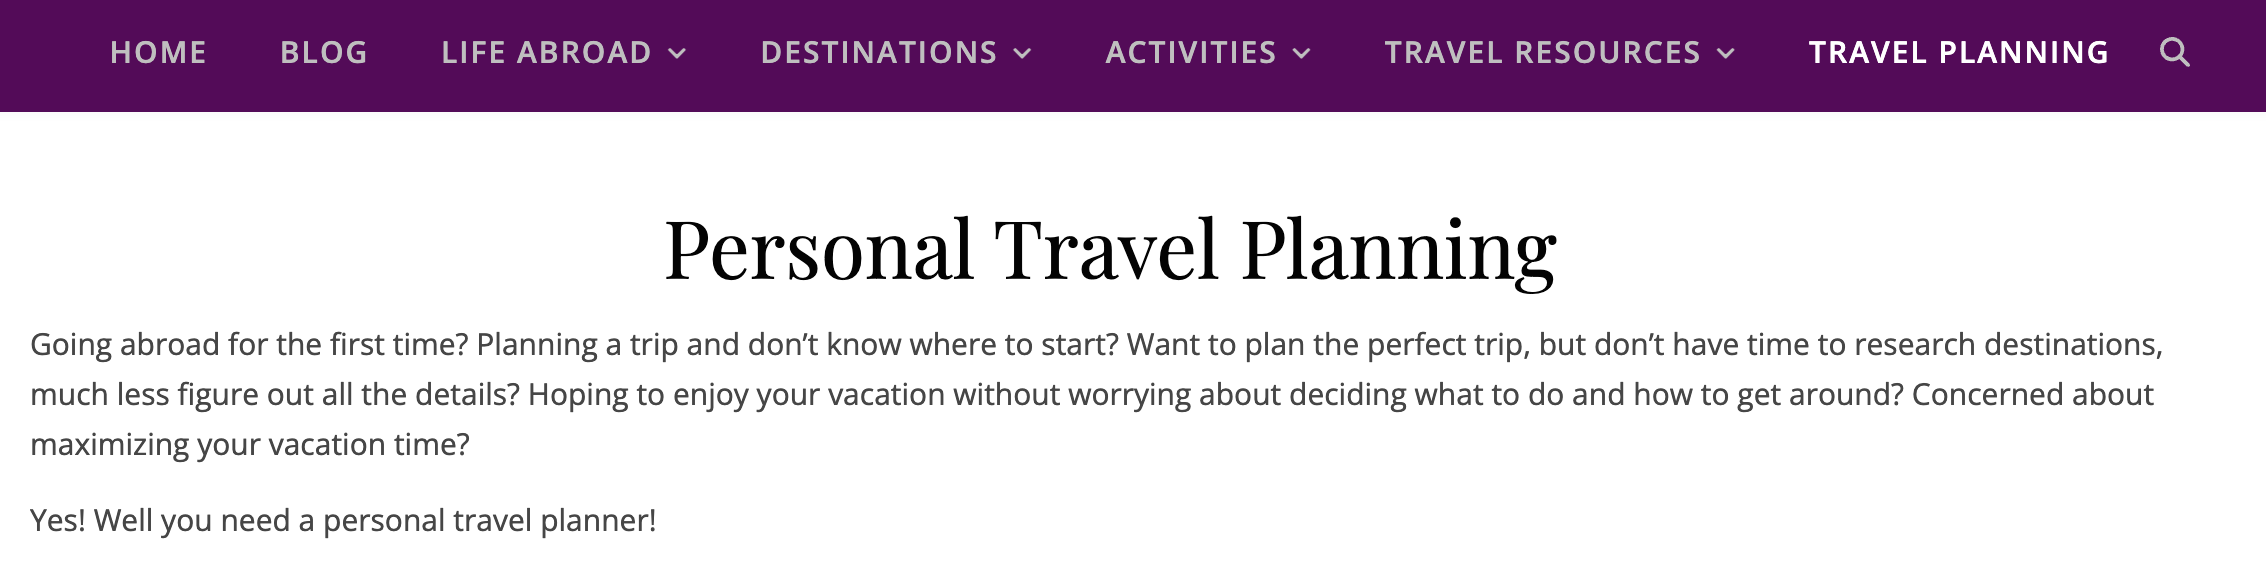 personal travel planning